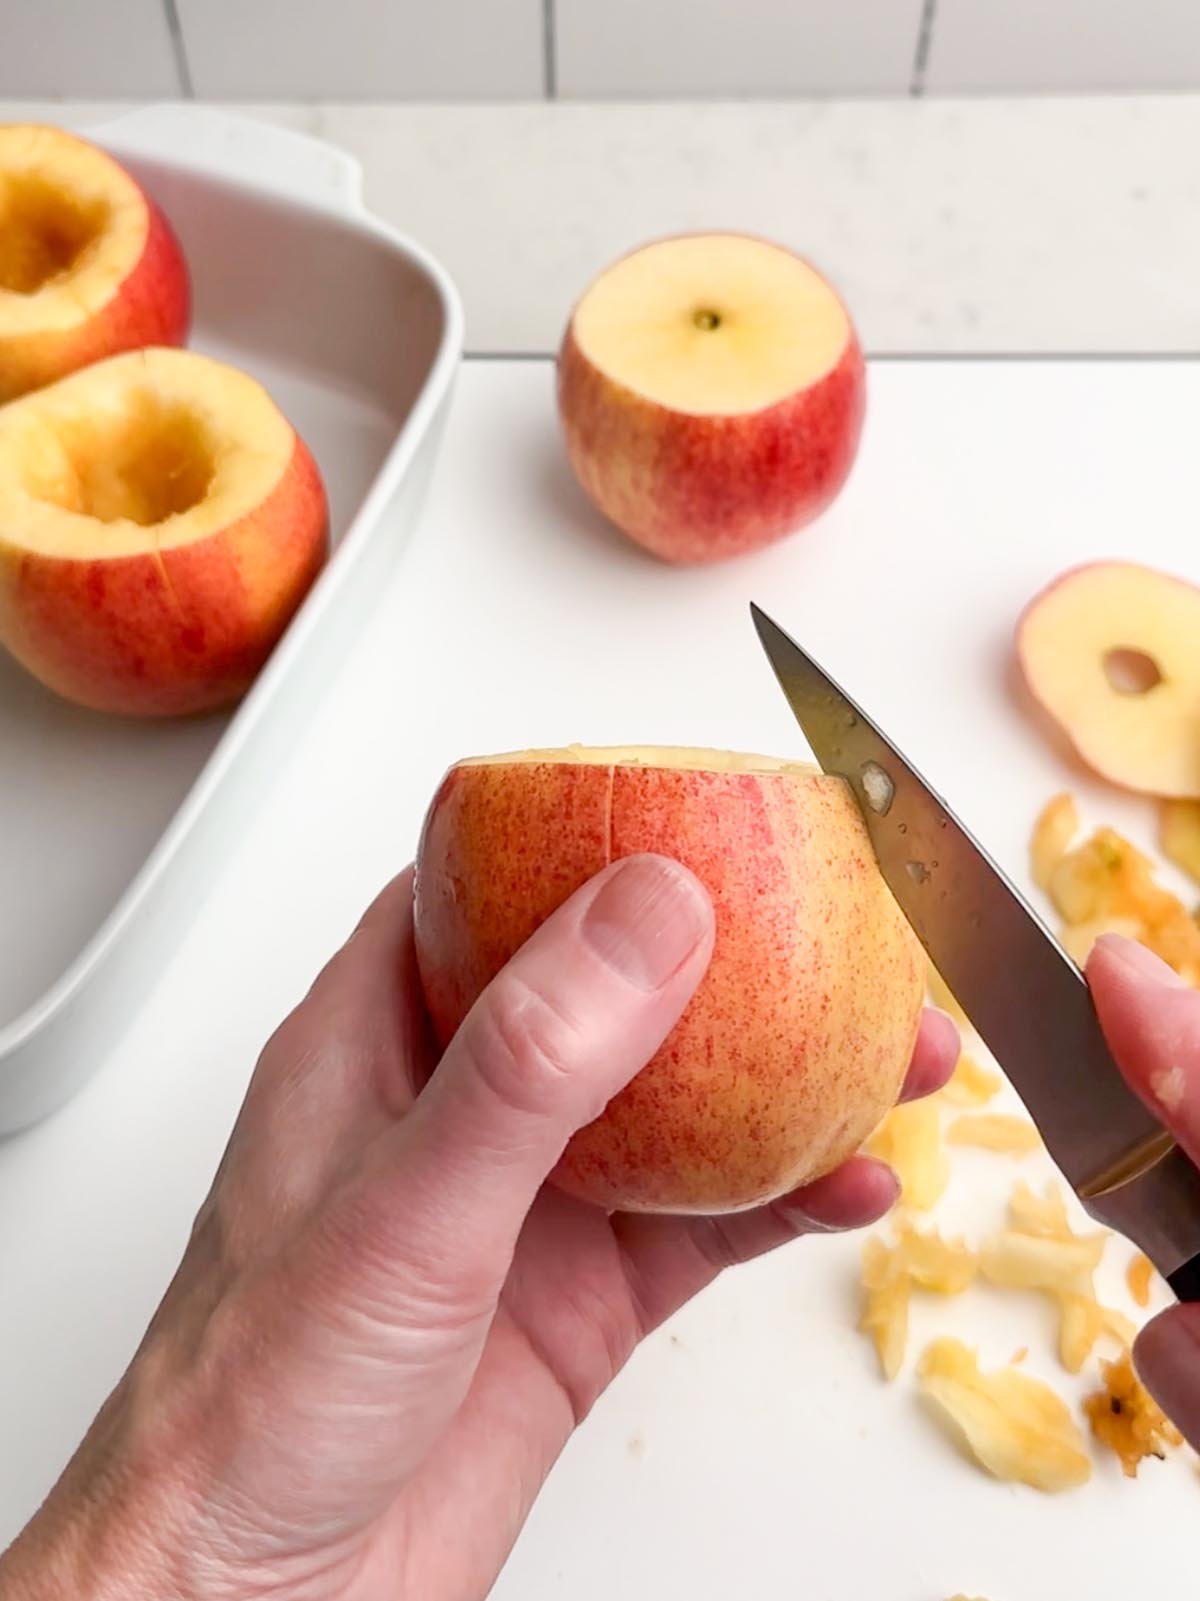 hands holding an apple and a paring knife scoring the skin of the apple